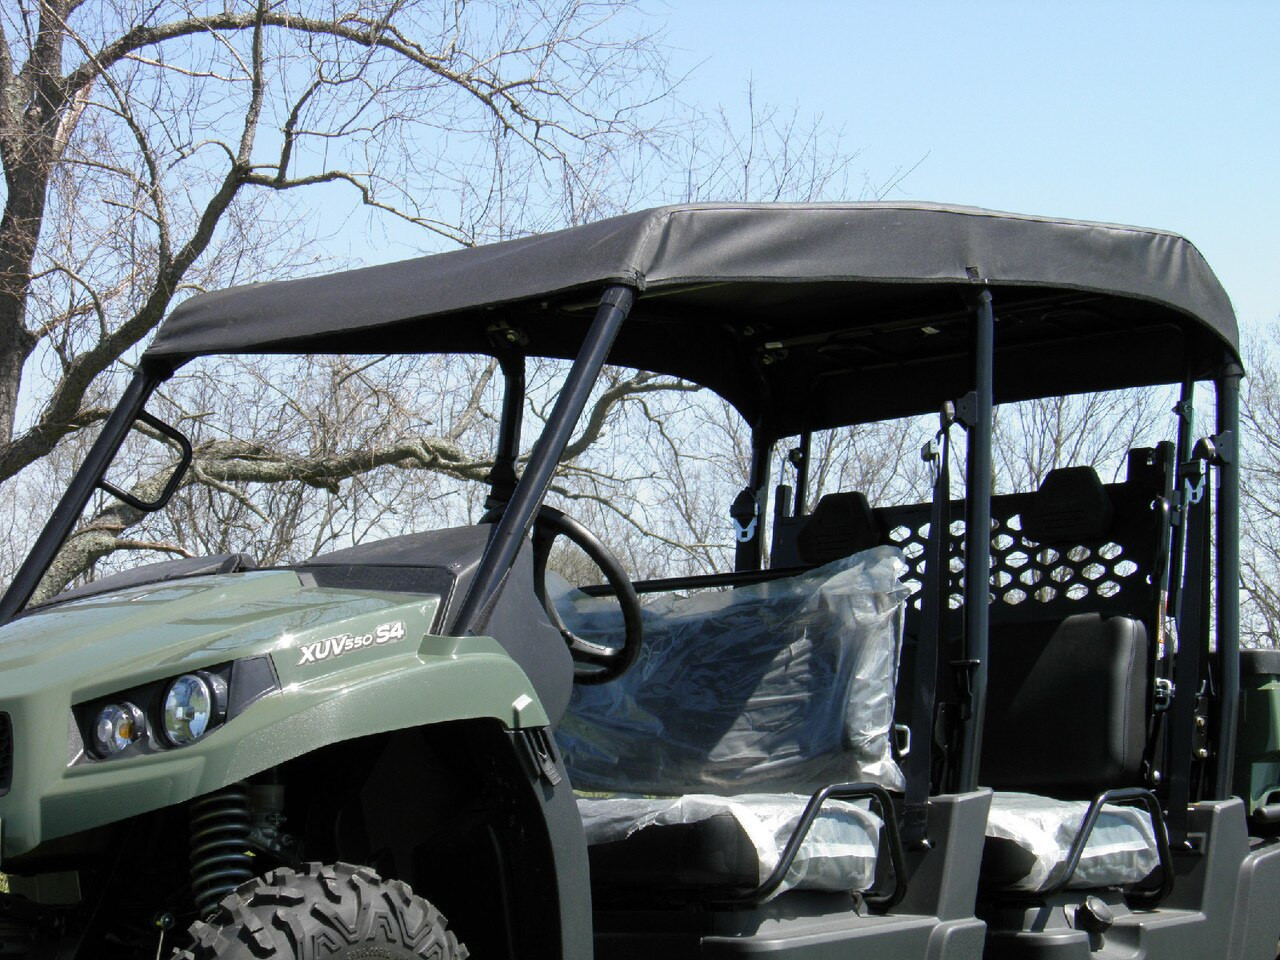 3 Star side x side John Deere Gator UXV 550/560/590 S4 soft top front and side angle view close up